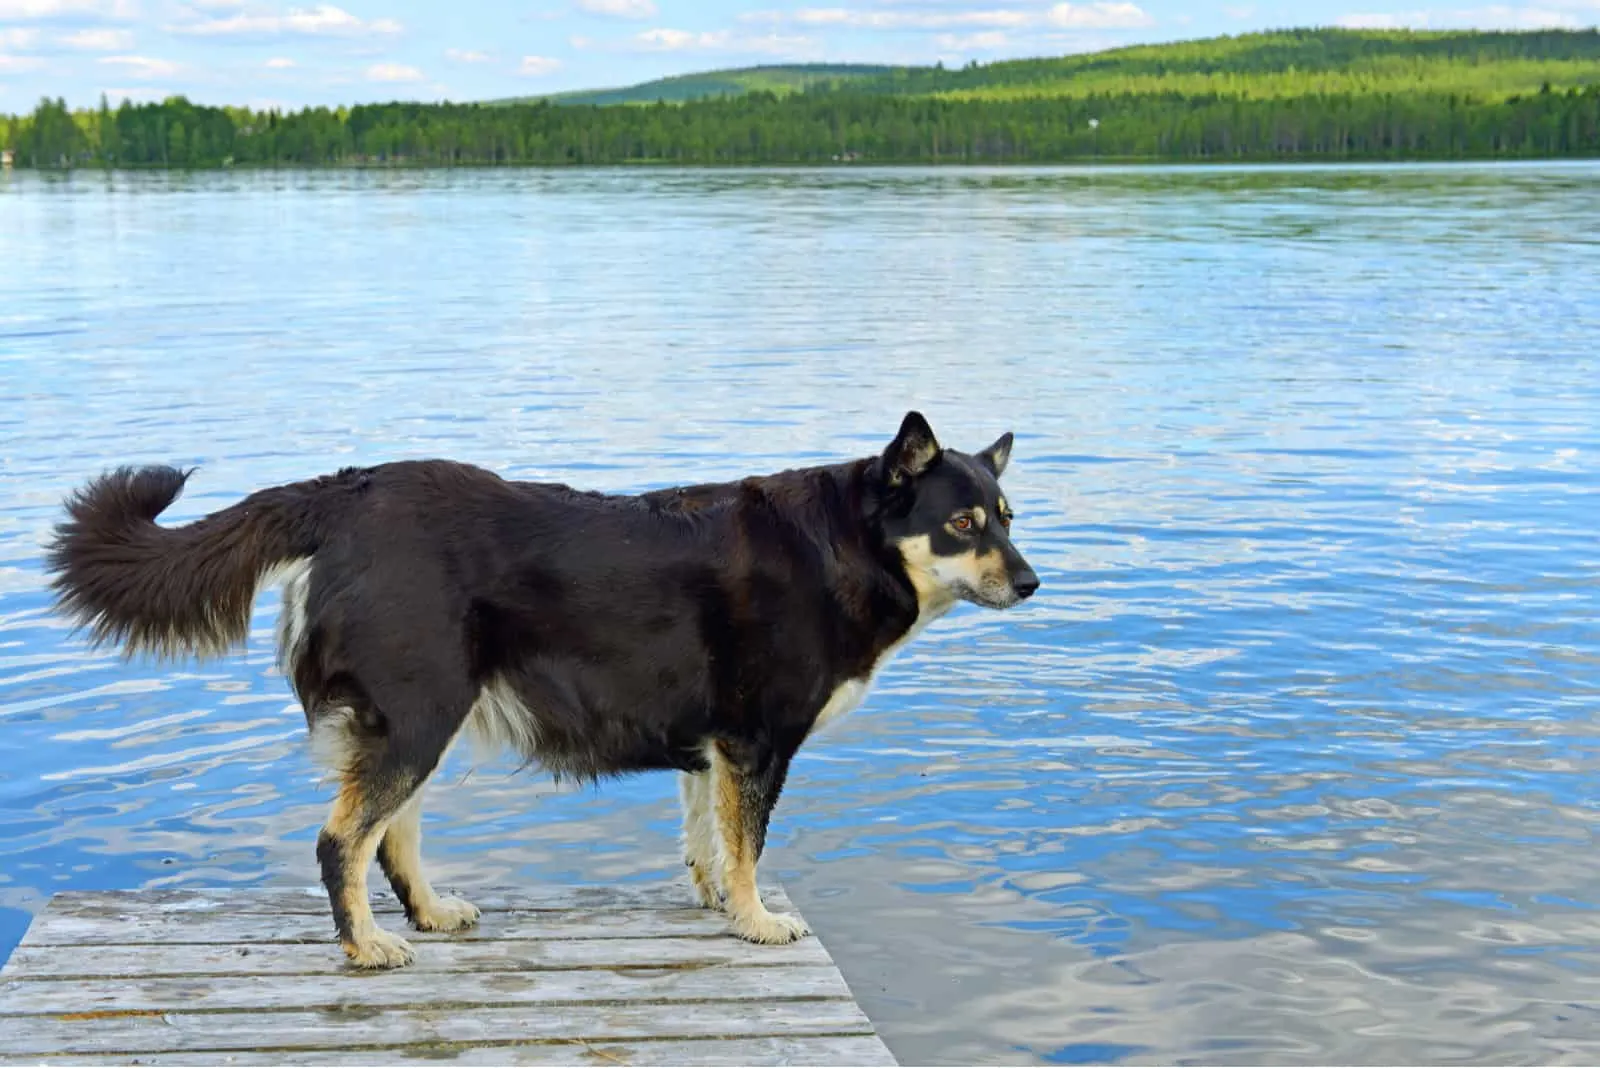 The Lapponian Herder stands on the pier